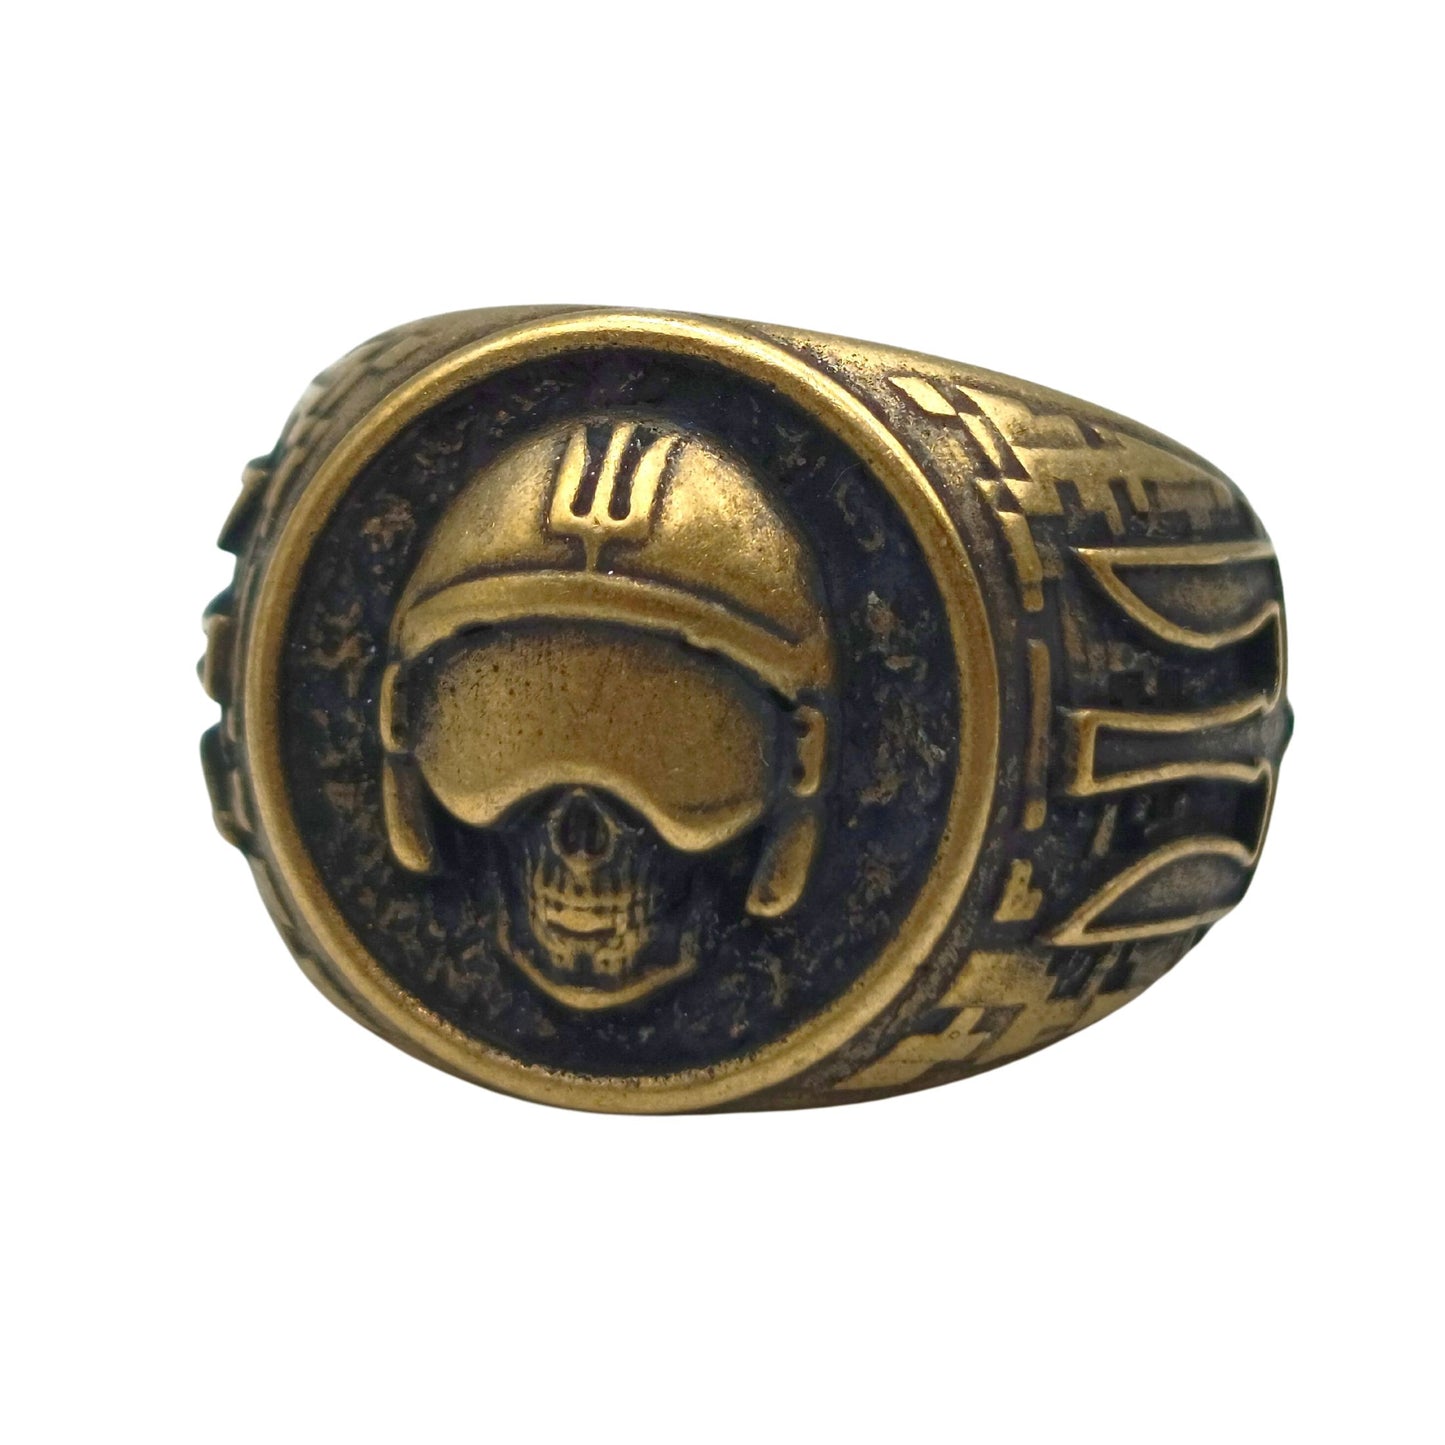 The Ghost of Kyiv signet ring from bronze